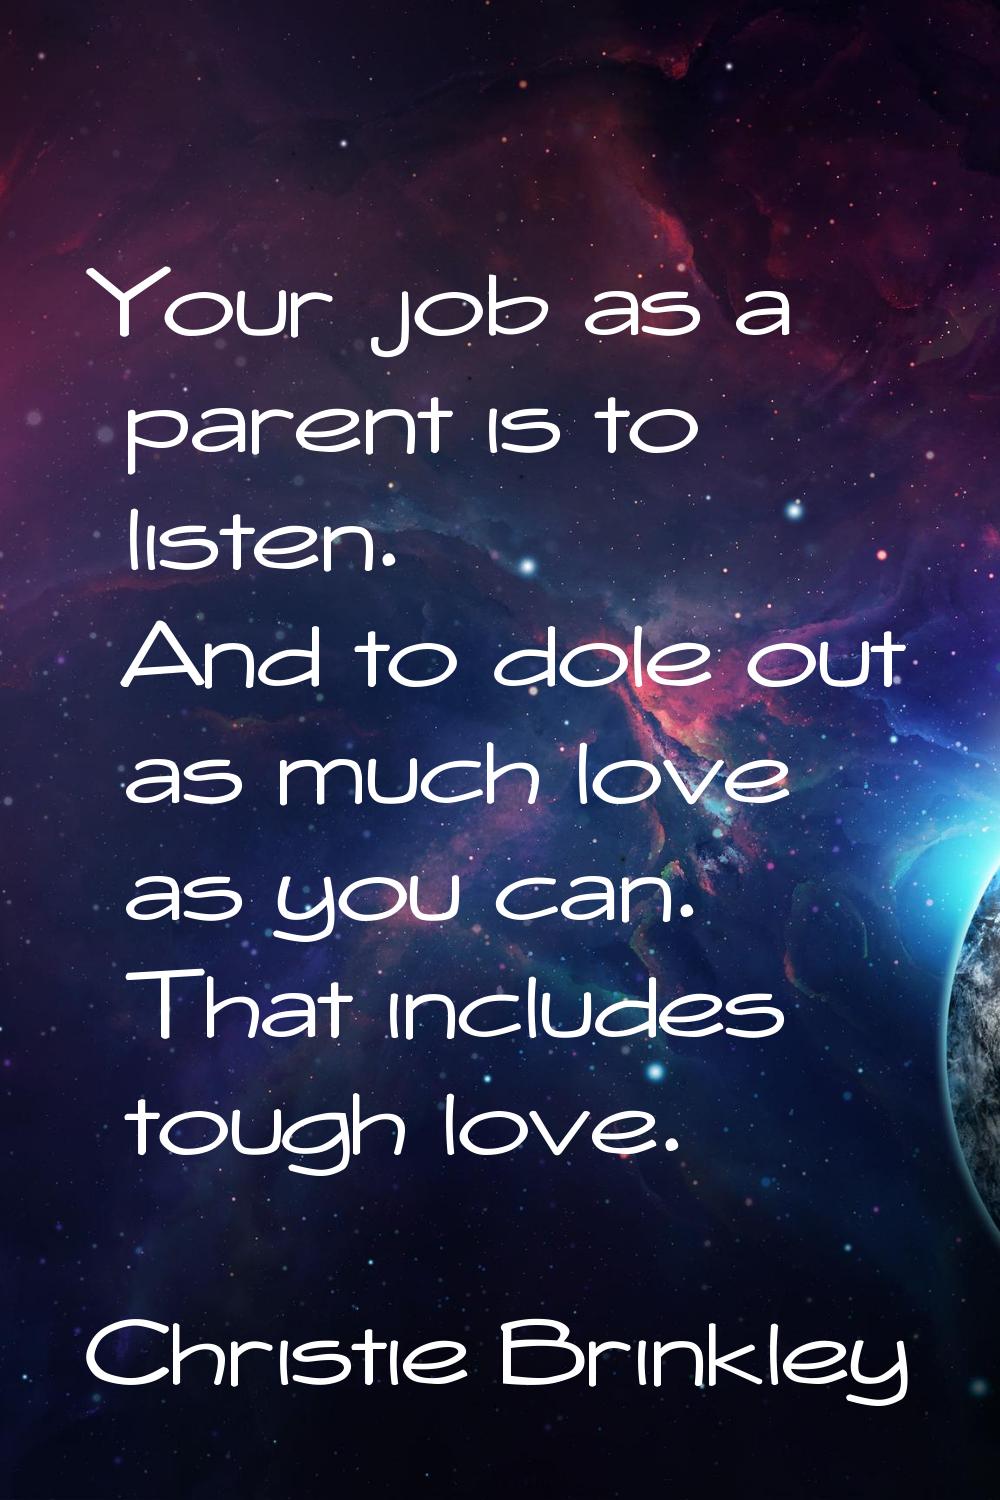 Your job as a parent is to listen. And to dole out as much love as you can. That includes tough lov